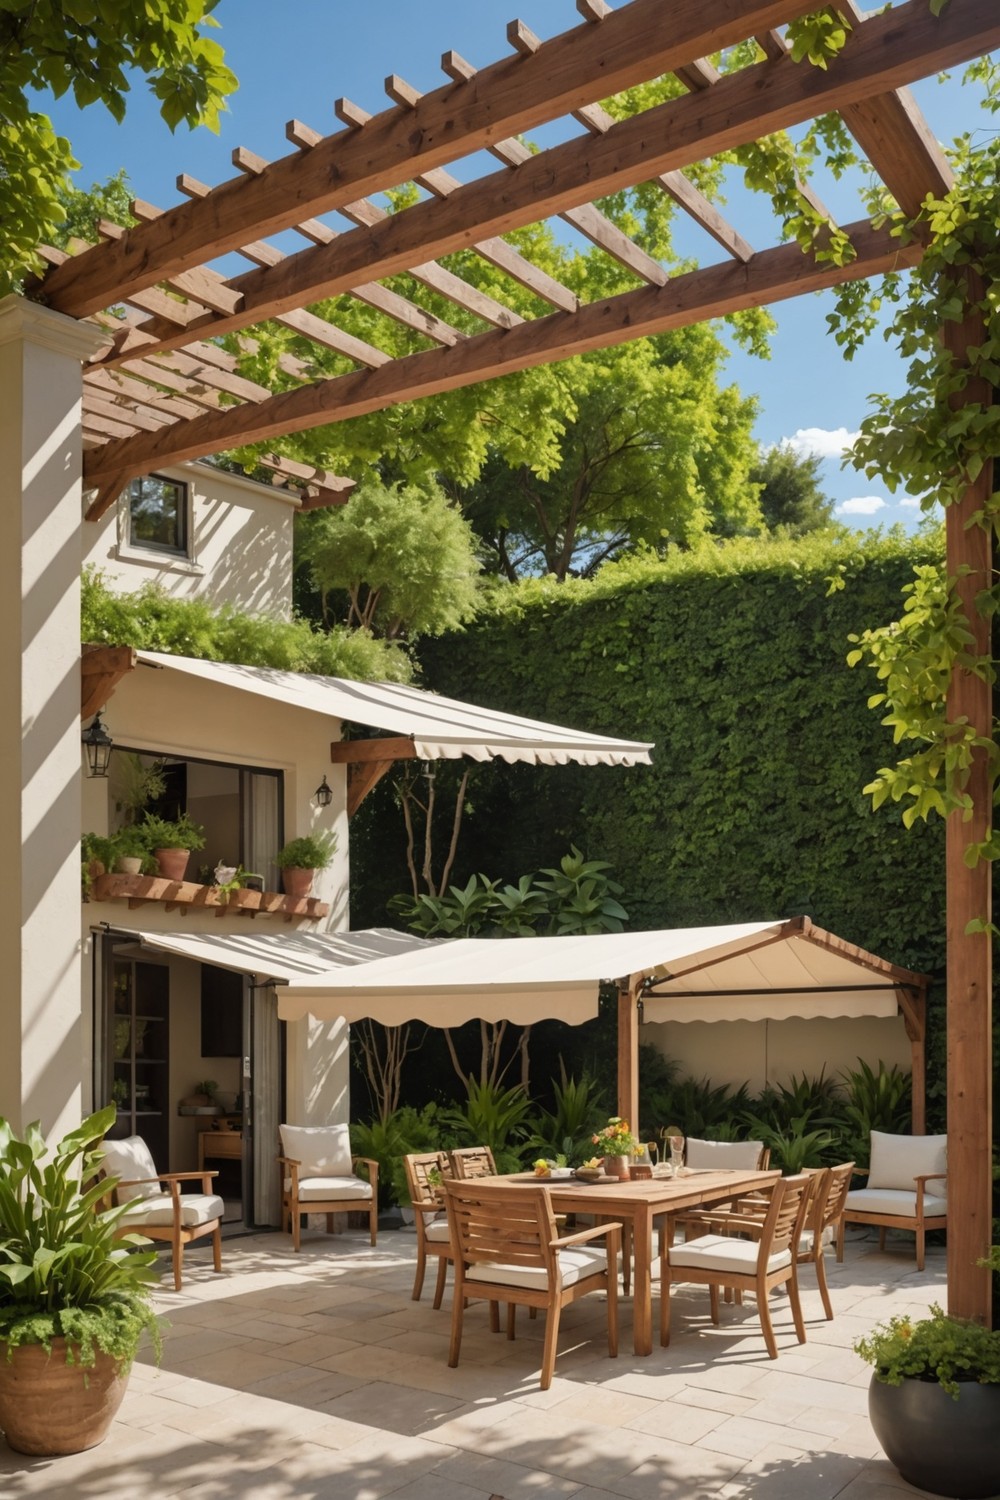 Outdoor Room Pergola with Retractable Awnings